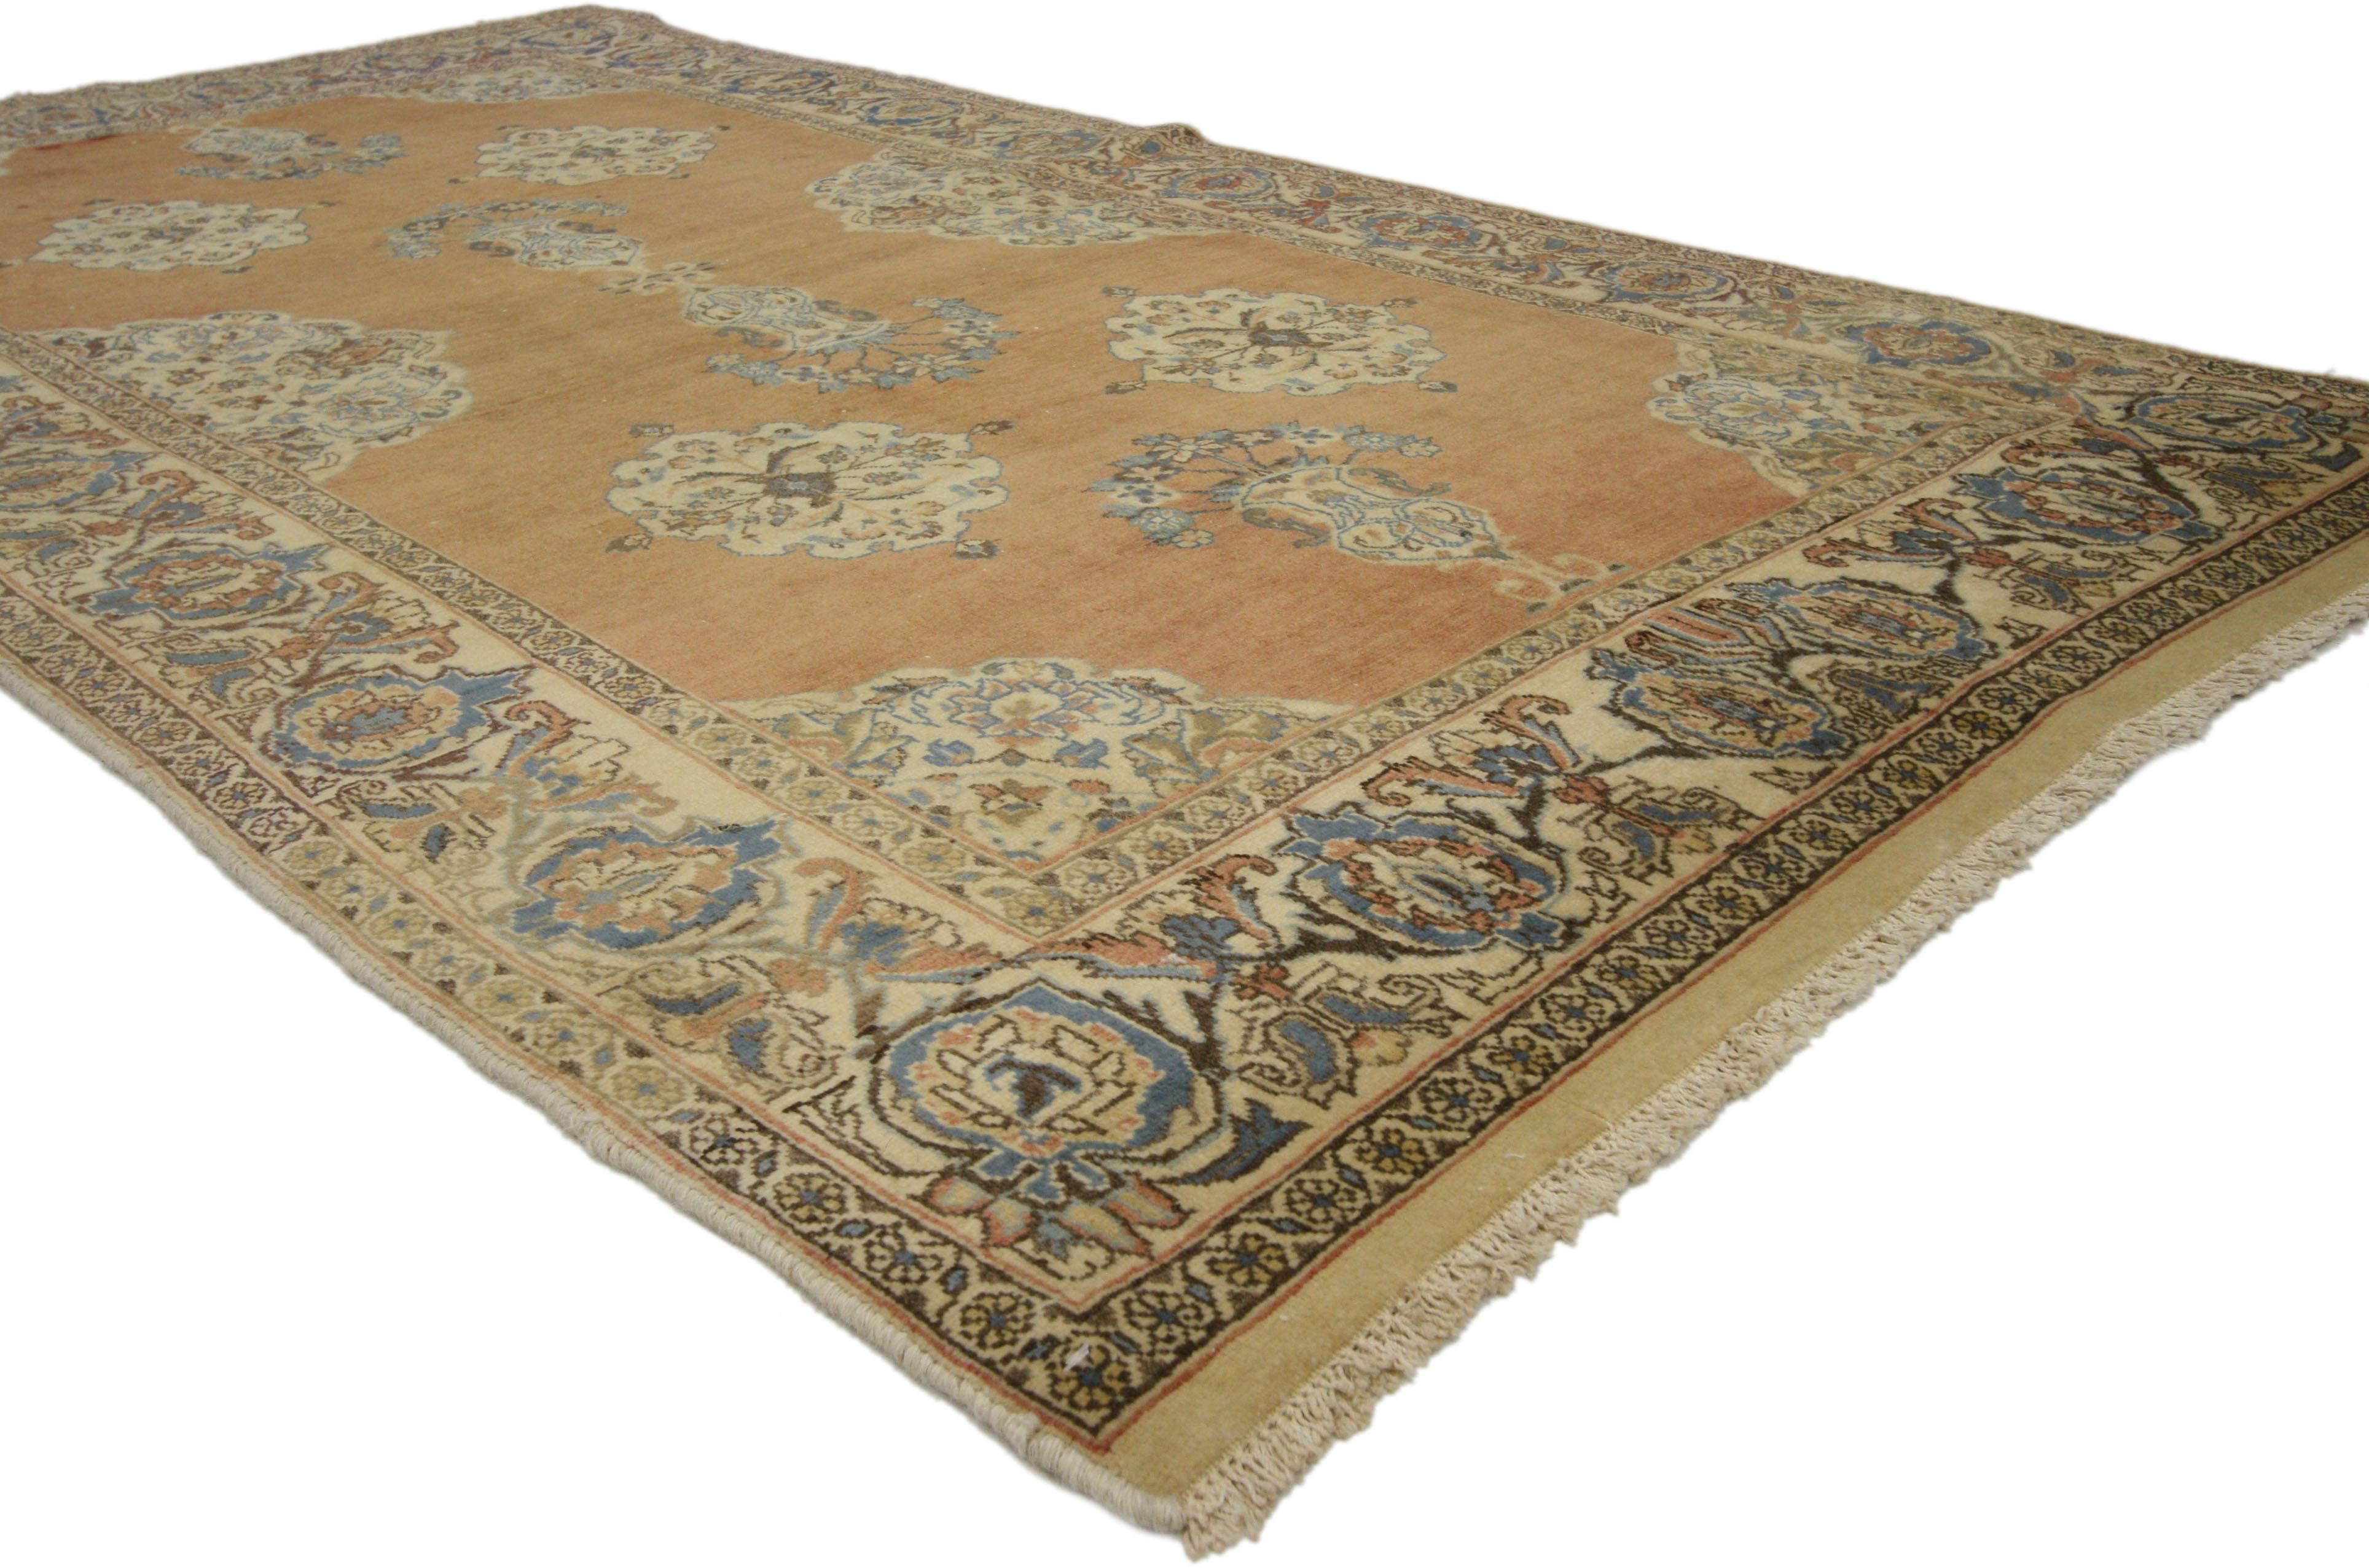 75204 Vintage Persian Tabriz rug with Swedish Farmhouse Style 04'00 X 07'07. This hand-knotted wool vintage Tabriz rug features beautiful vase motifs along the center of an abrashed field surrounded by four scalloped floral medallions. Elaborate